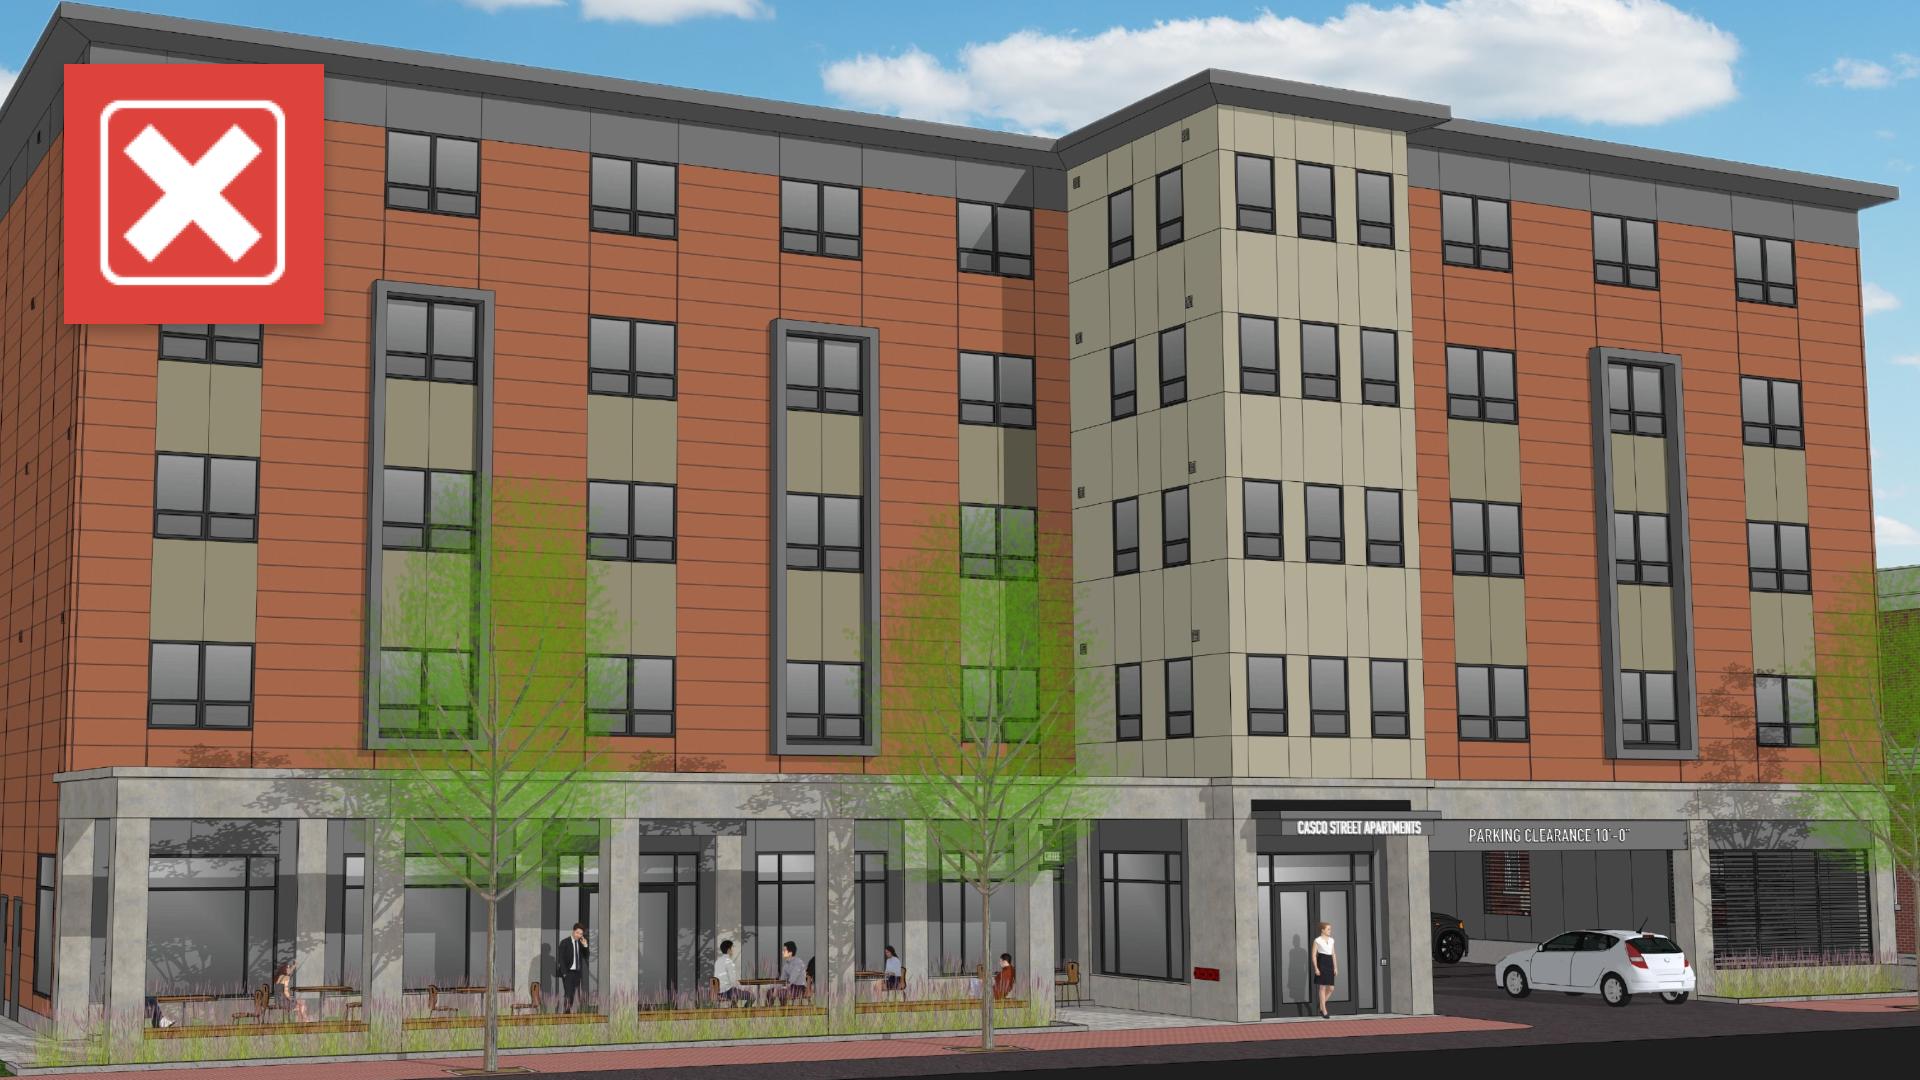 The project set to break ground in Portland is open to people 55+, including members of the LGBTQ+ community, allies, and other marginalized groups.